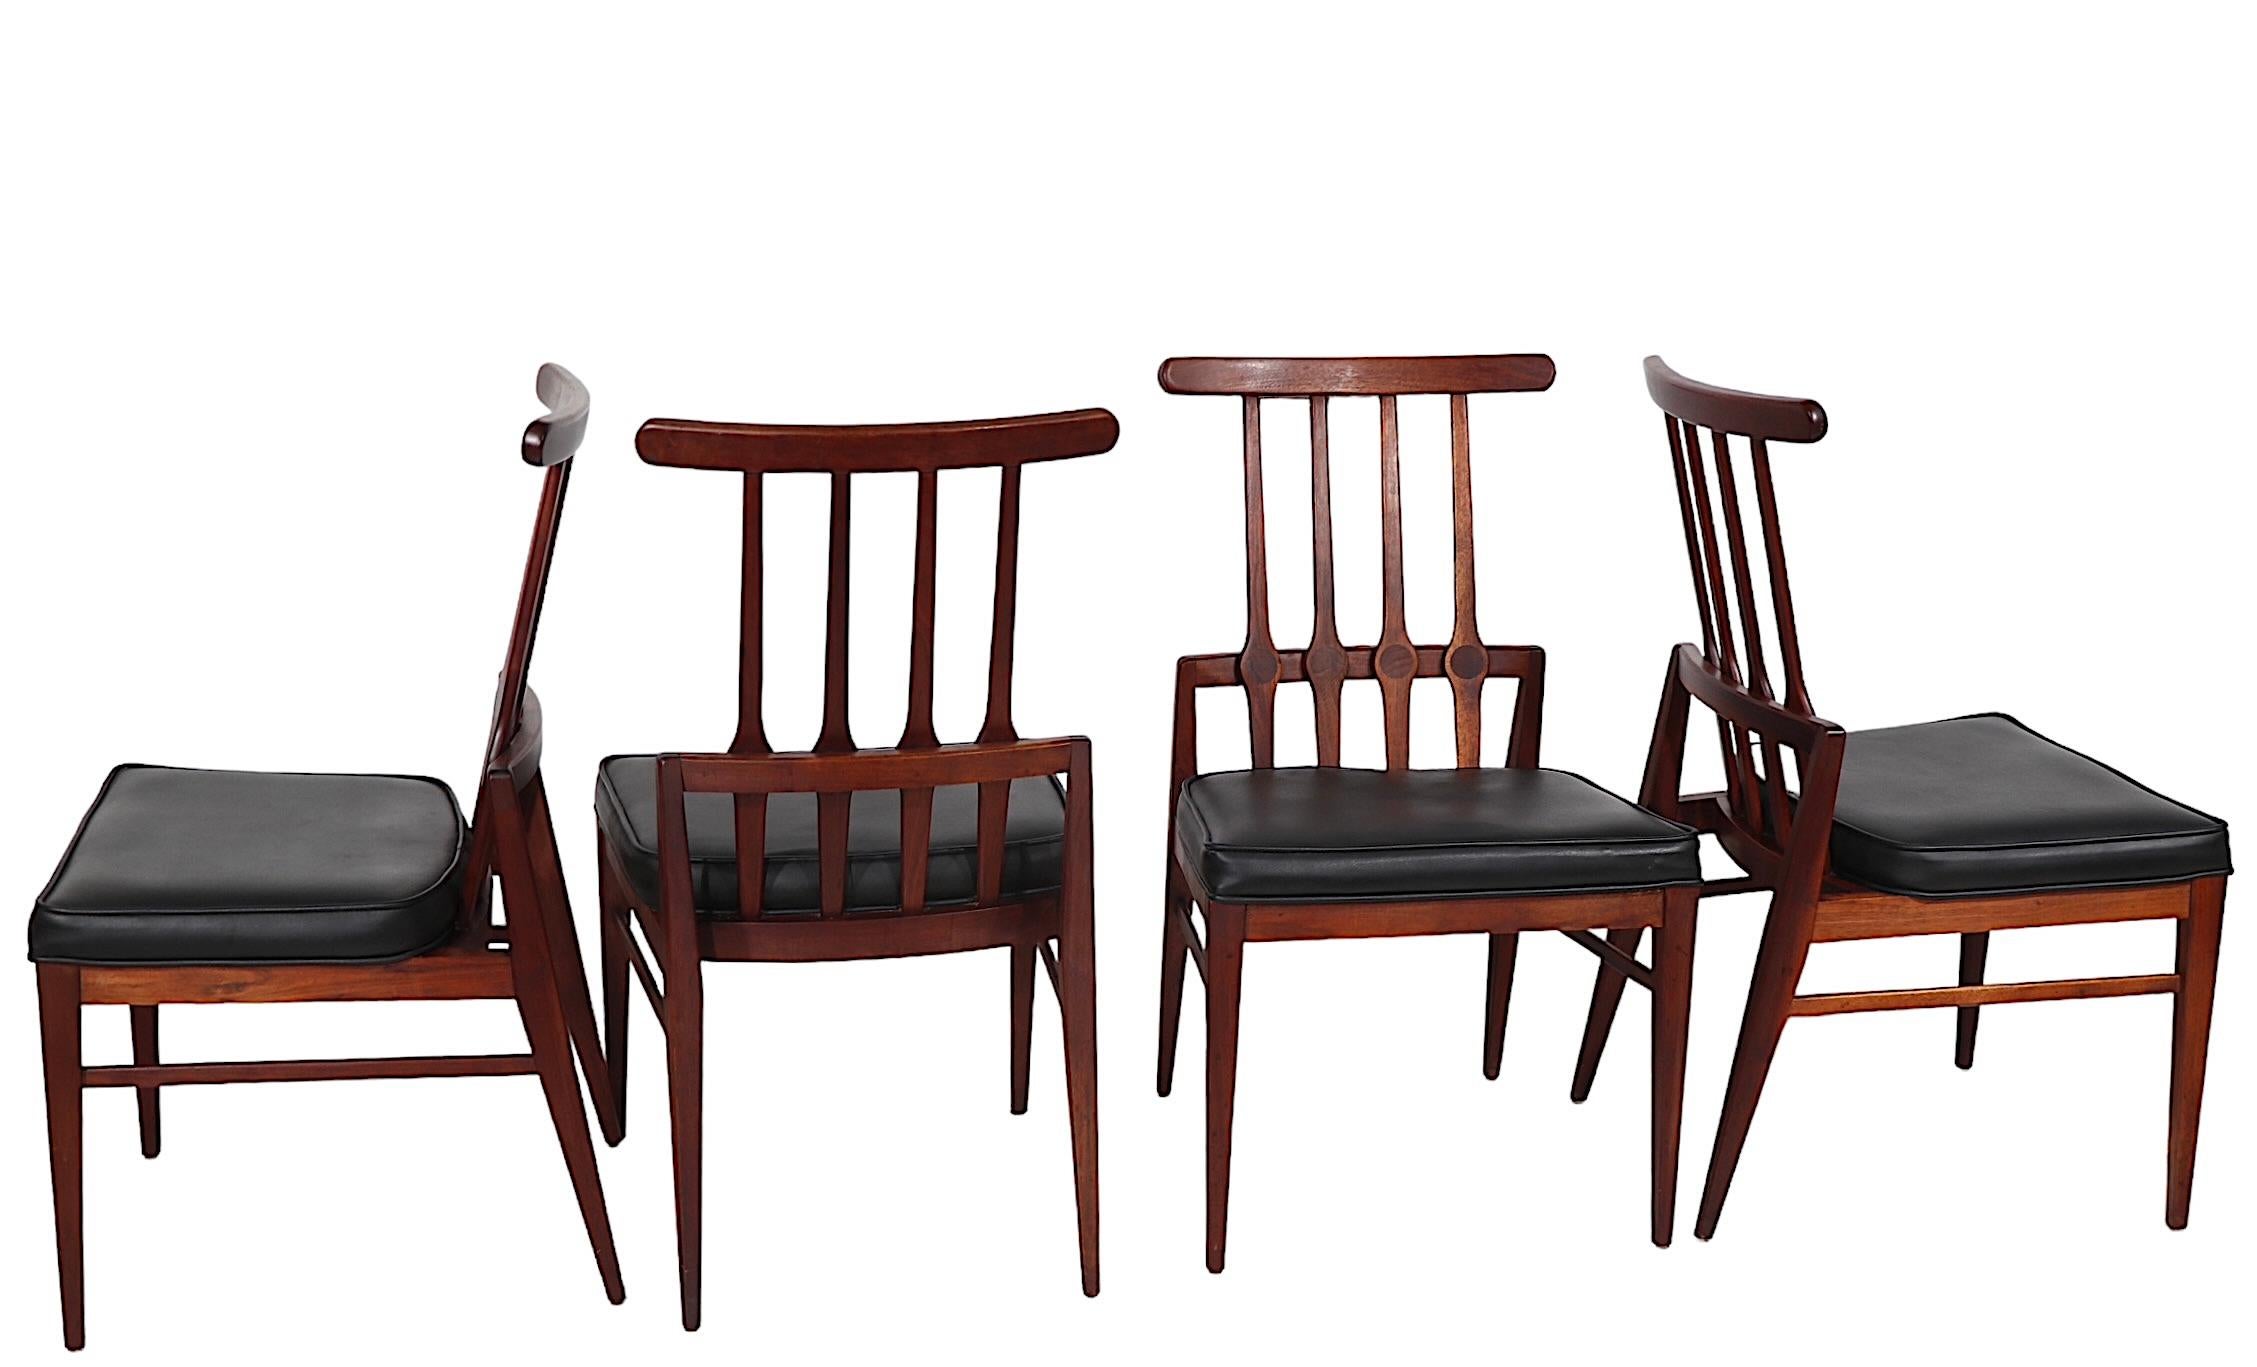 Set of Four Mid Century Dining Chairs by Foster - McDavid c 1950/1960's  For Sale 4